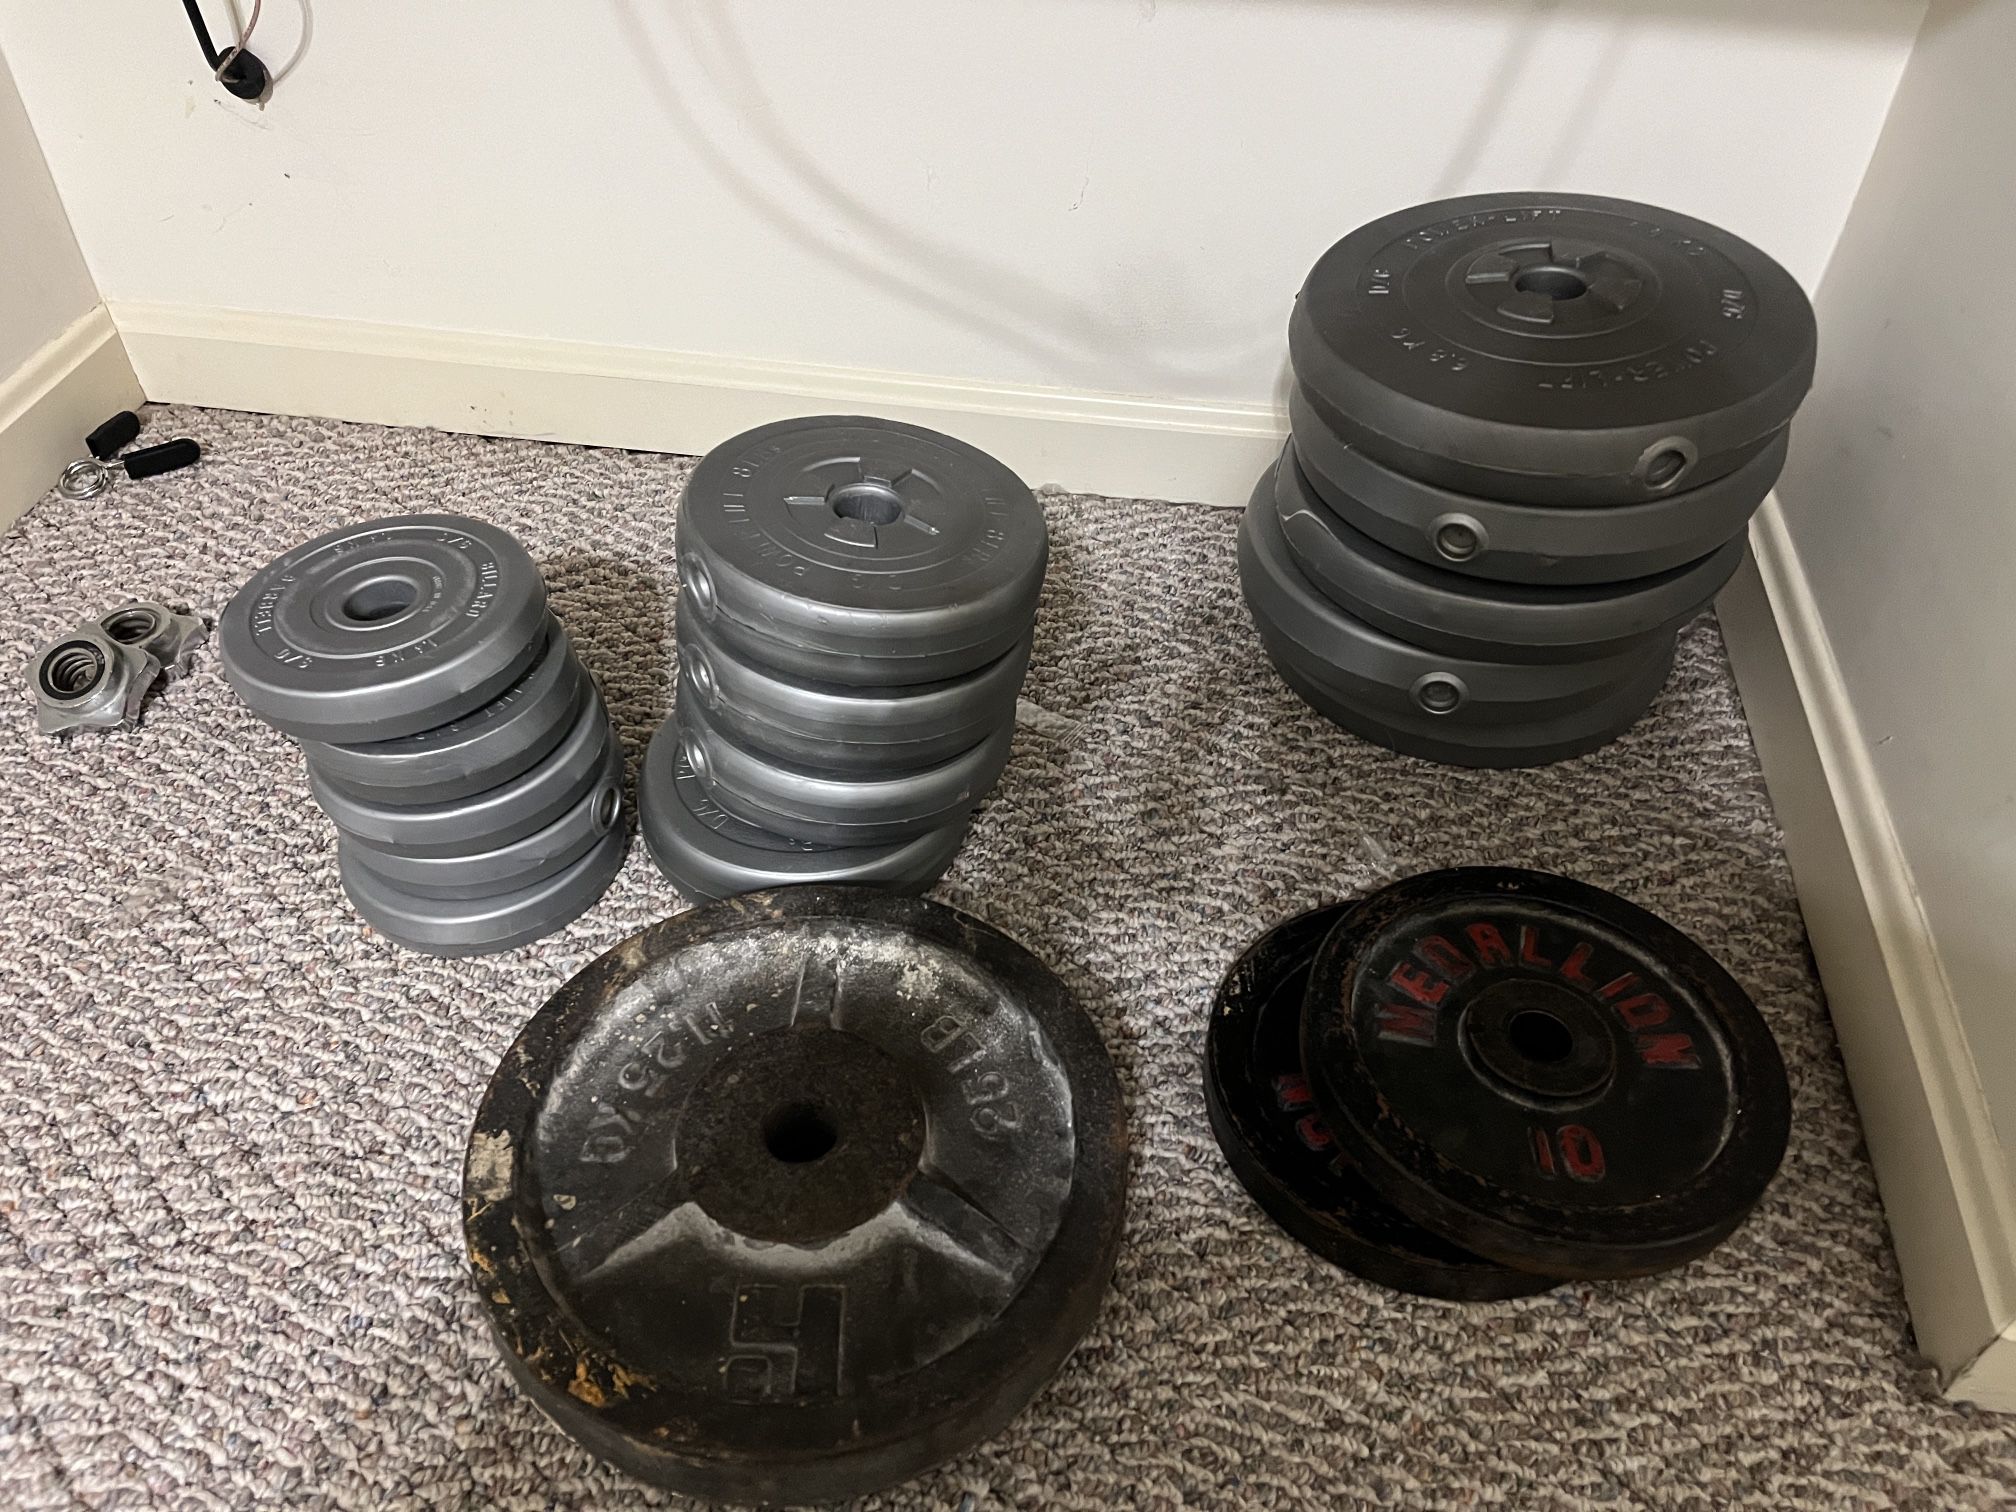 Cement and Iron Weight set